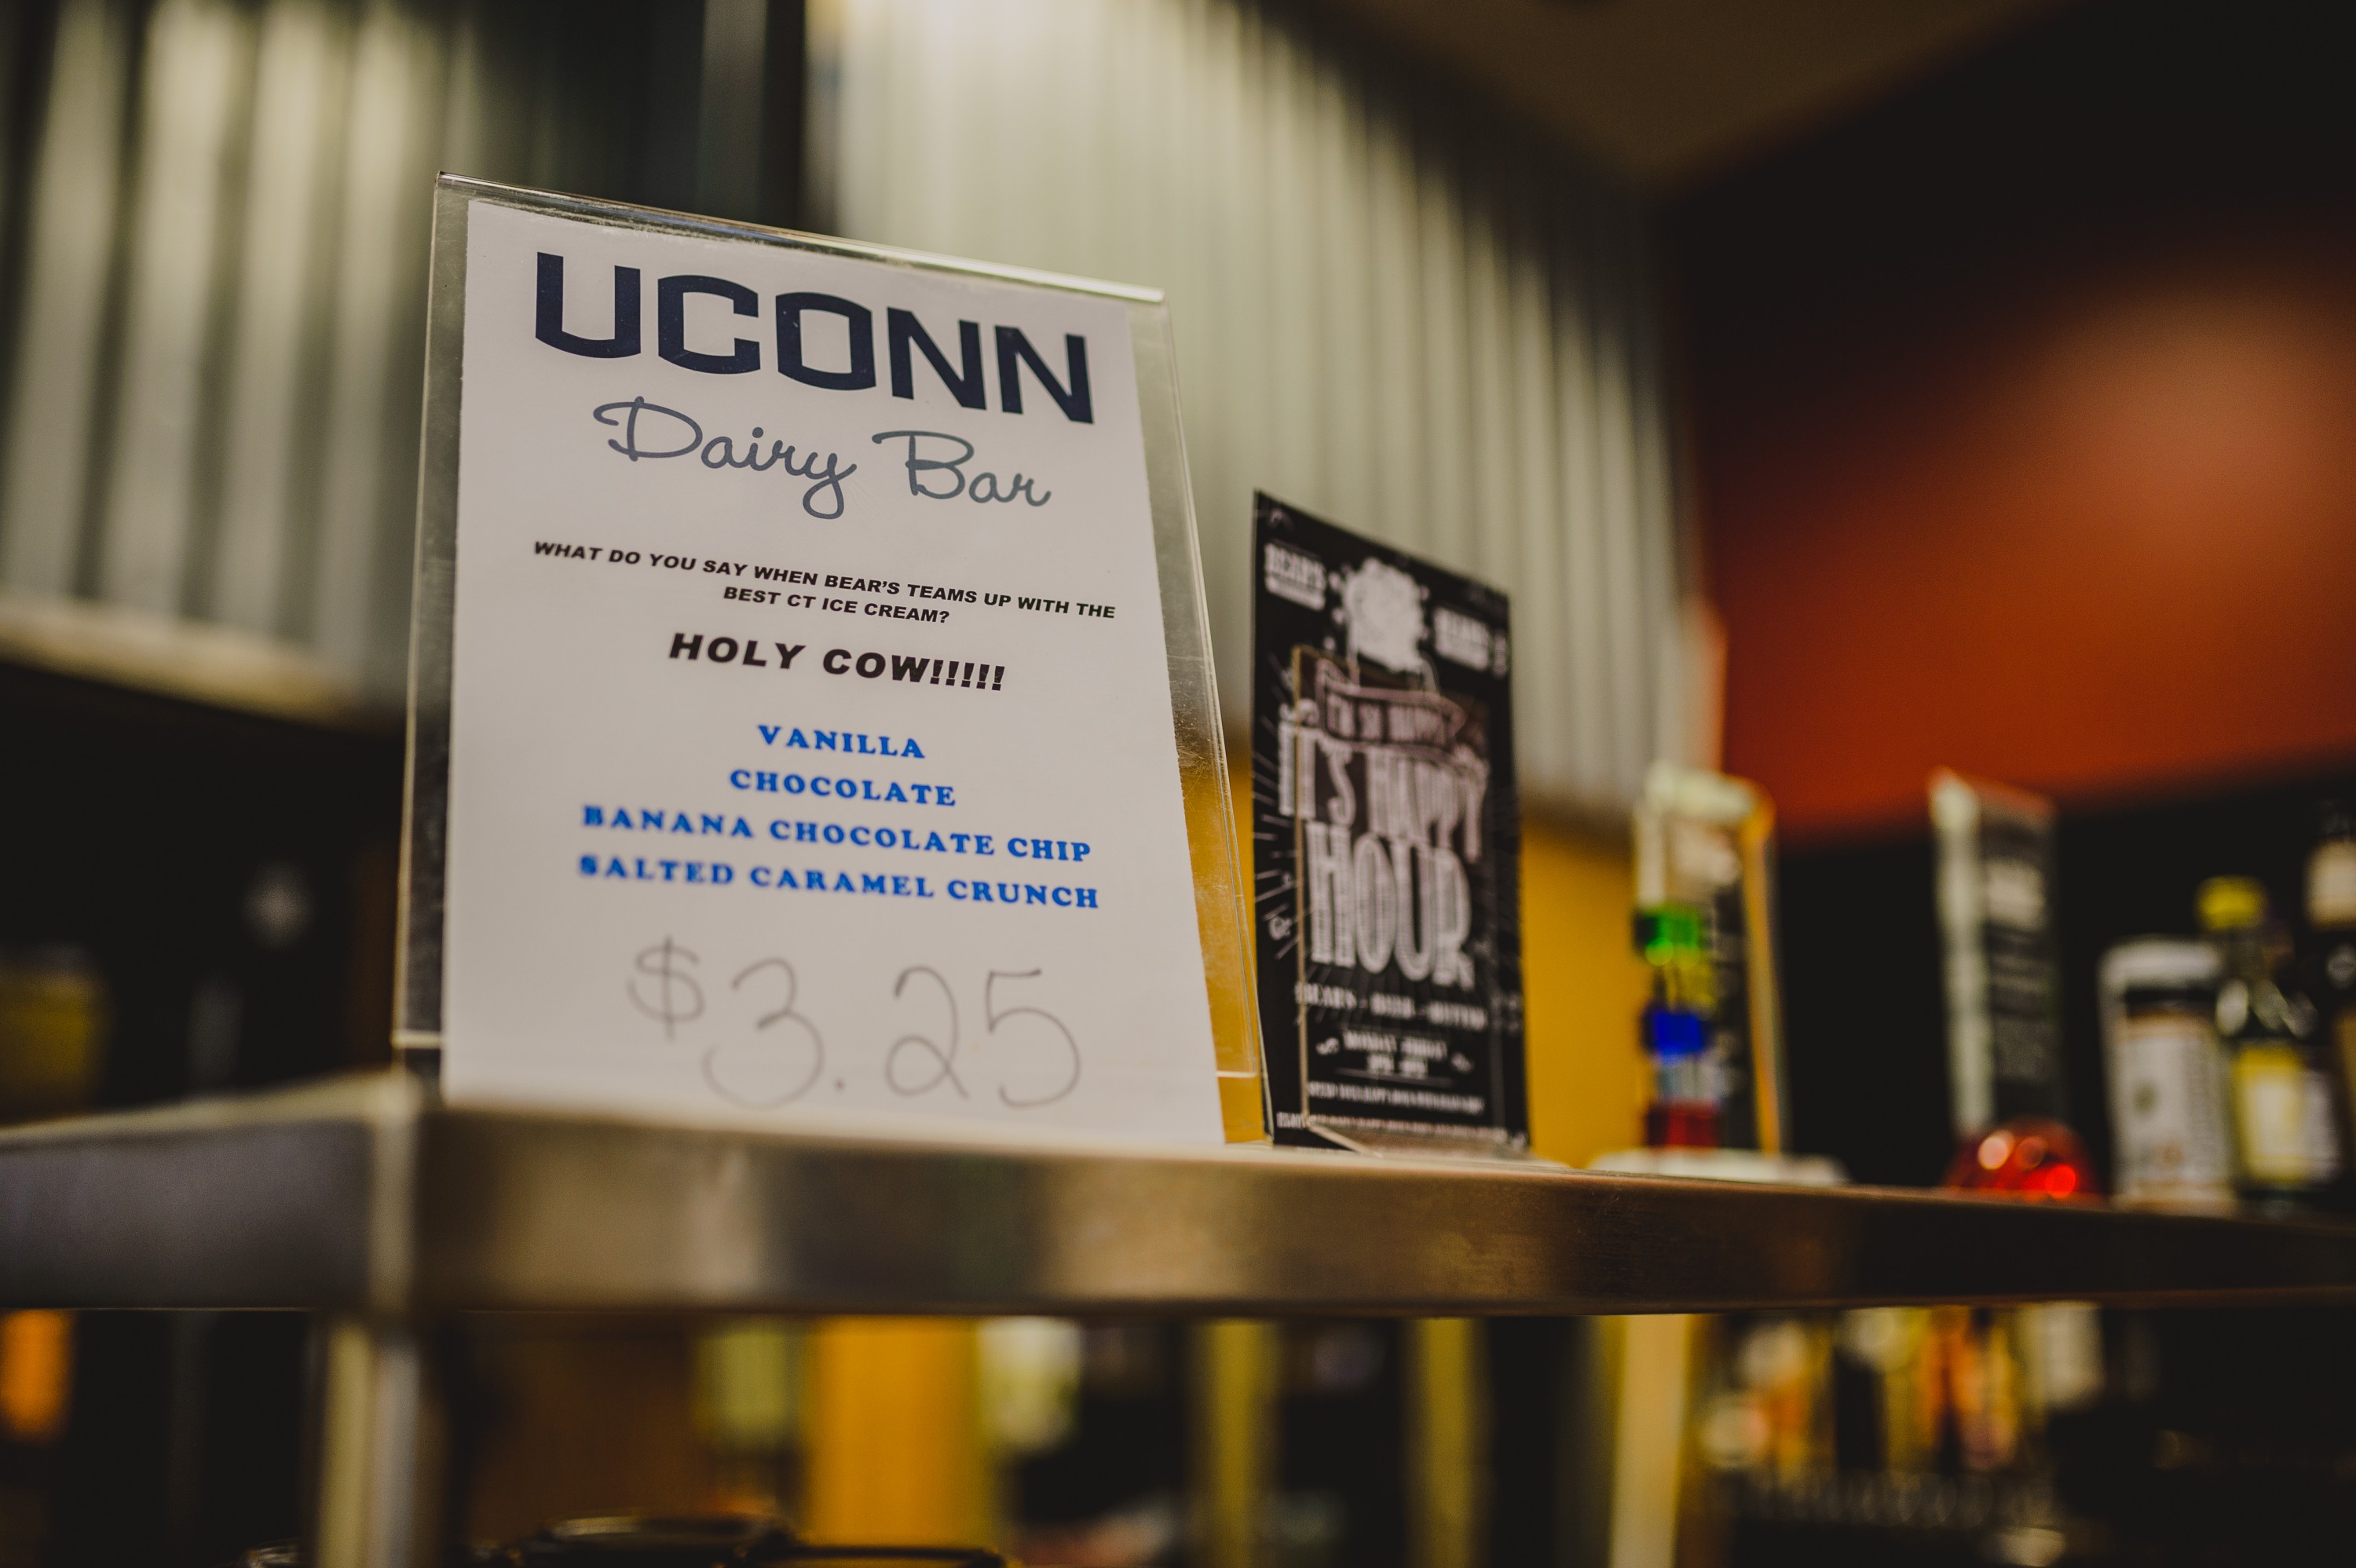 UConn Ice Cream has been added to the menu at Bear's Smokehouse.